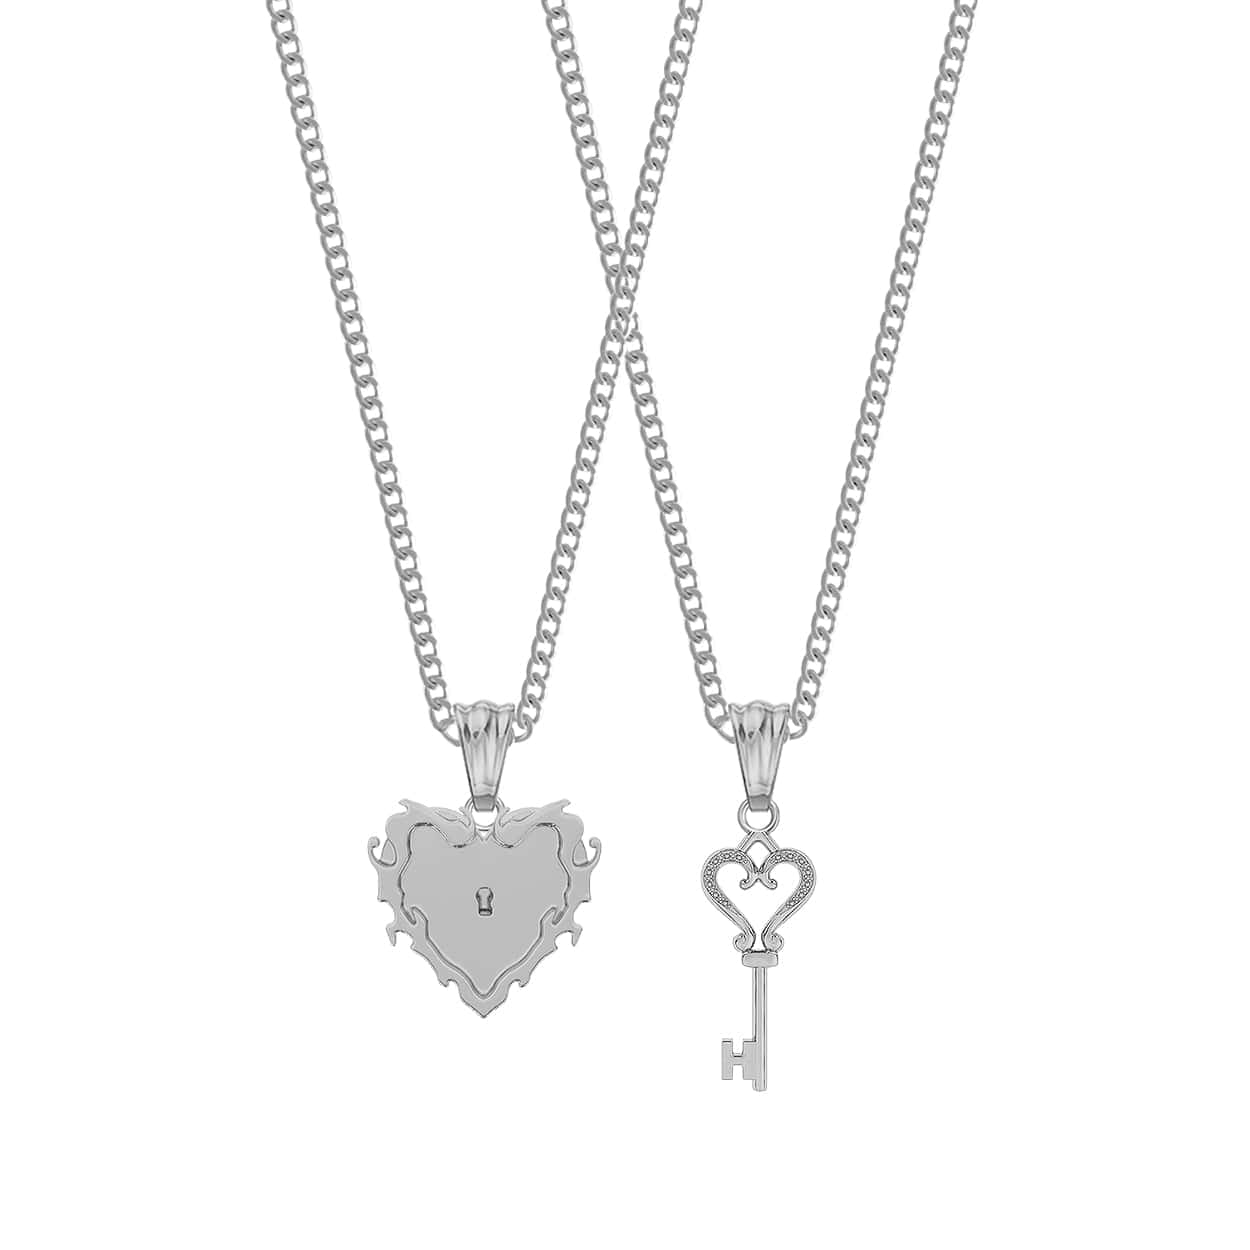 Mister x Cyberdreams Loner Necklace Mister SFC